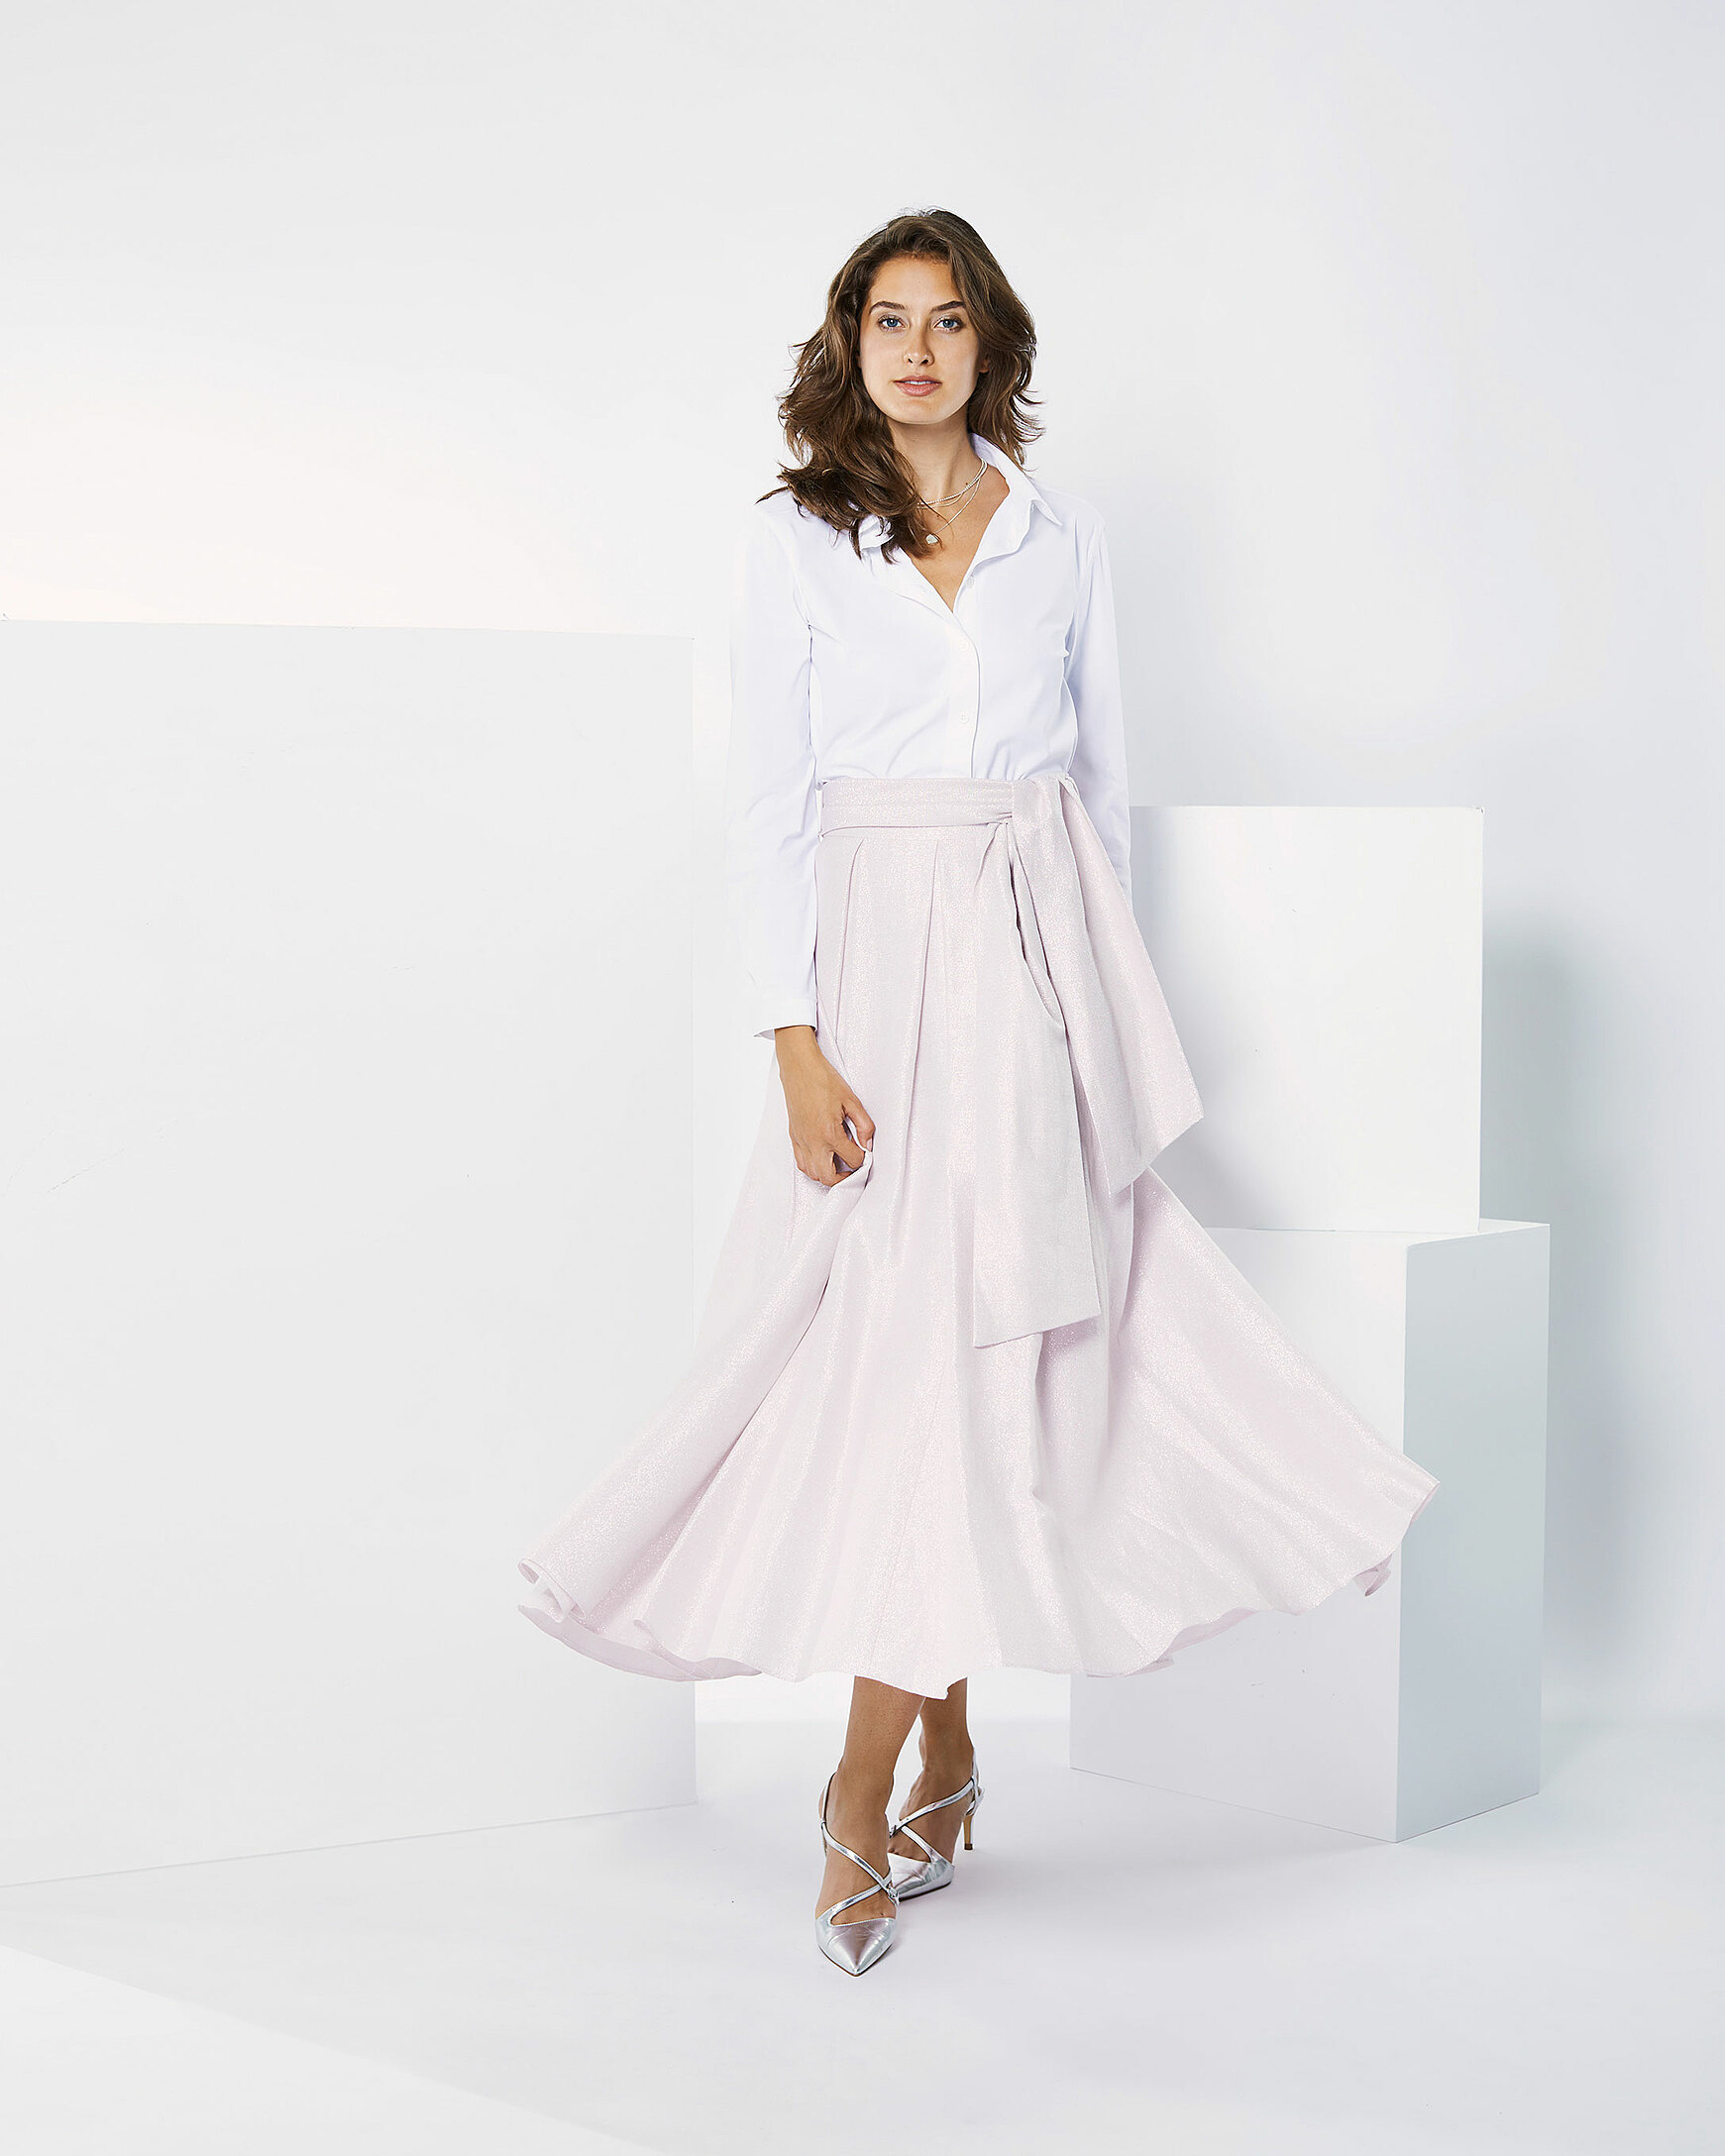 A brown hair model in rosy skirt and a white blouse is moving in a white setting